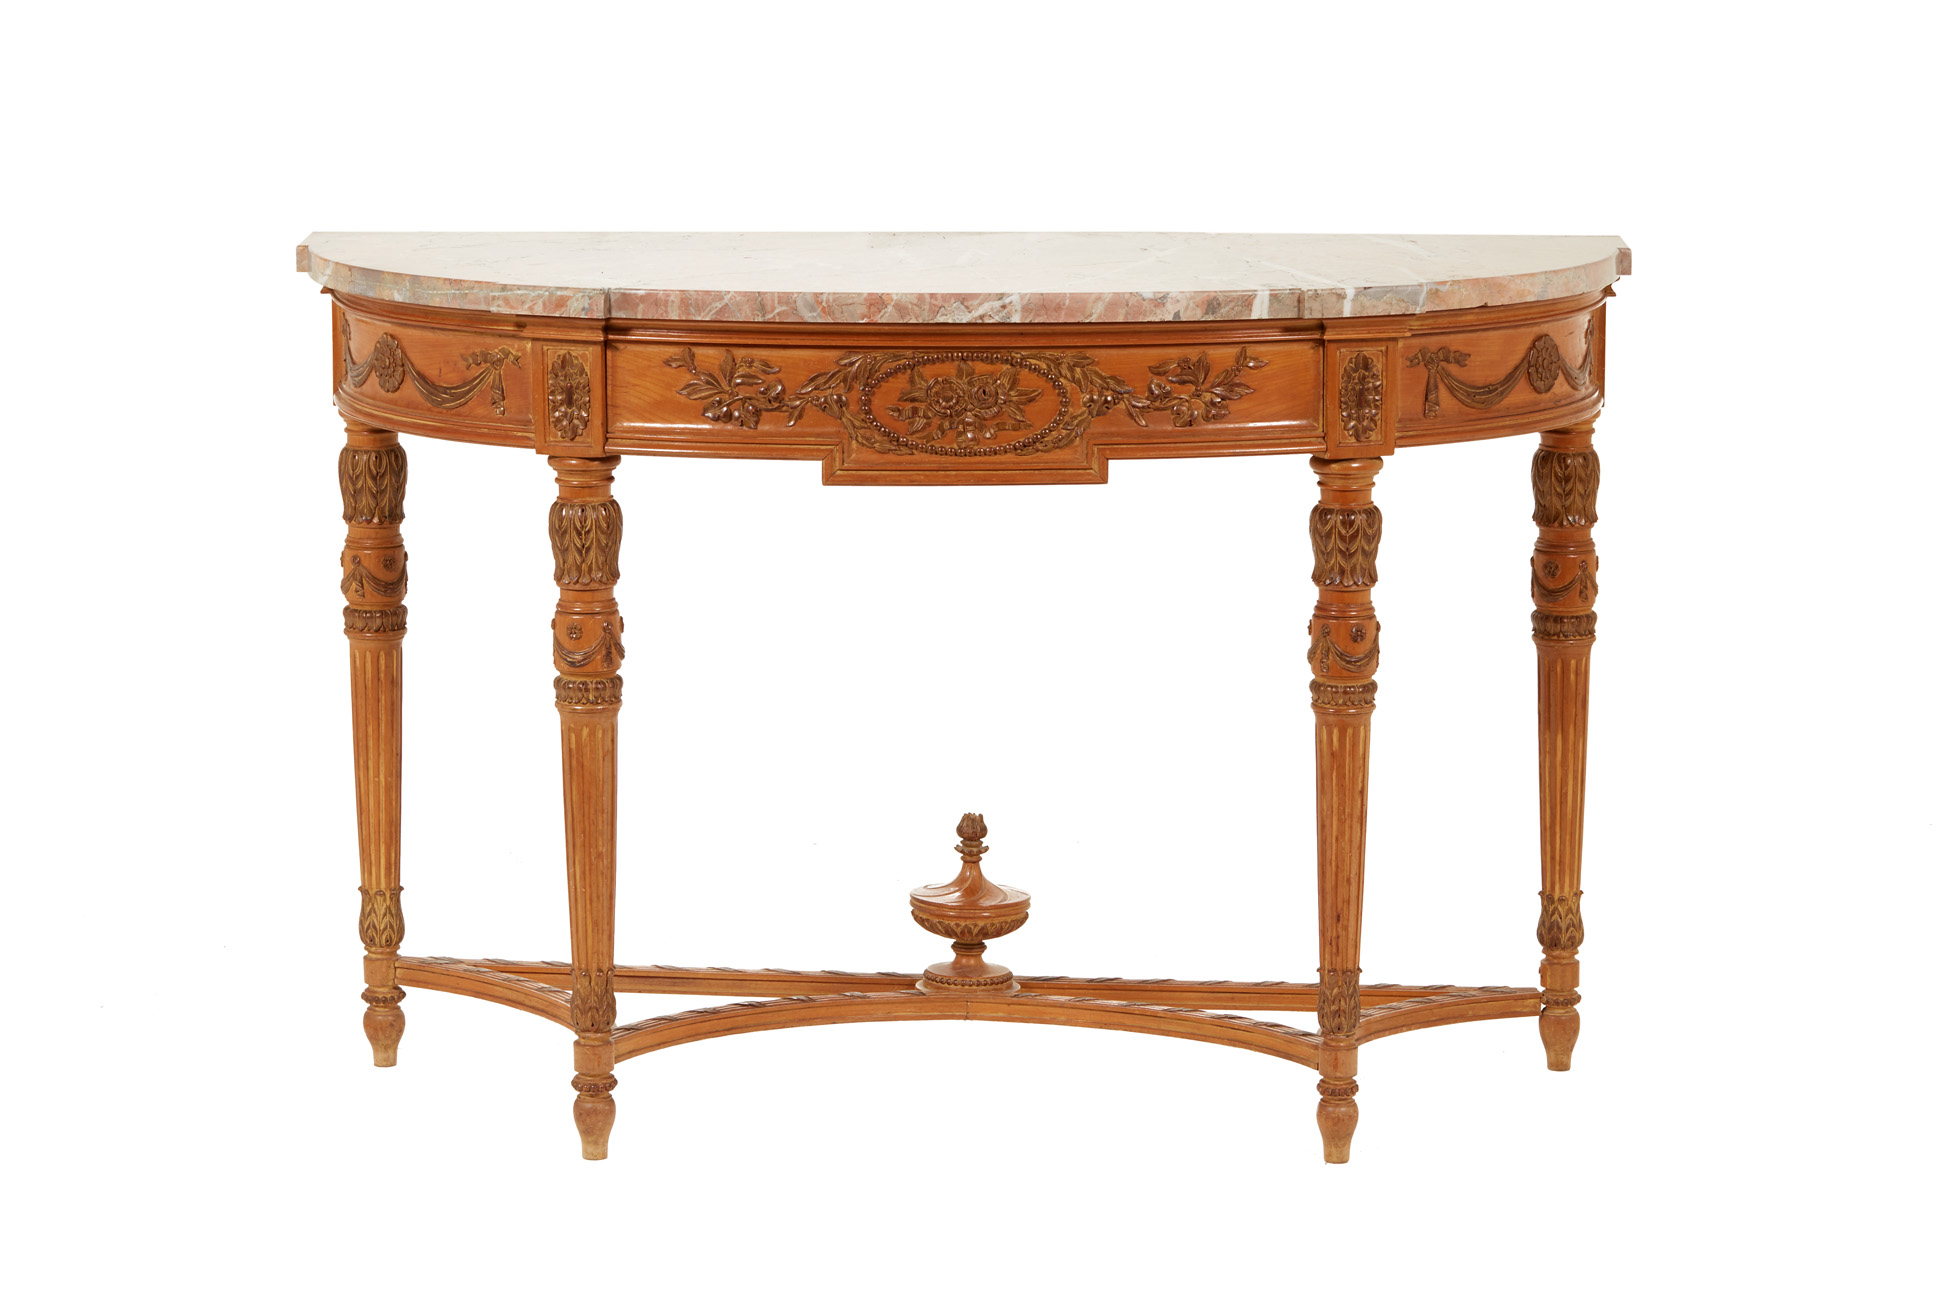 A FRENCH DEMI-LUNE MARBLE TOP CONSOLE TABLE